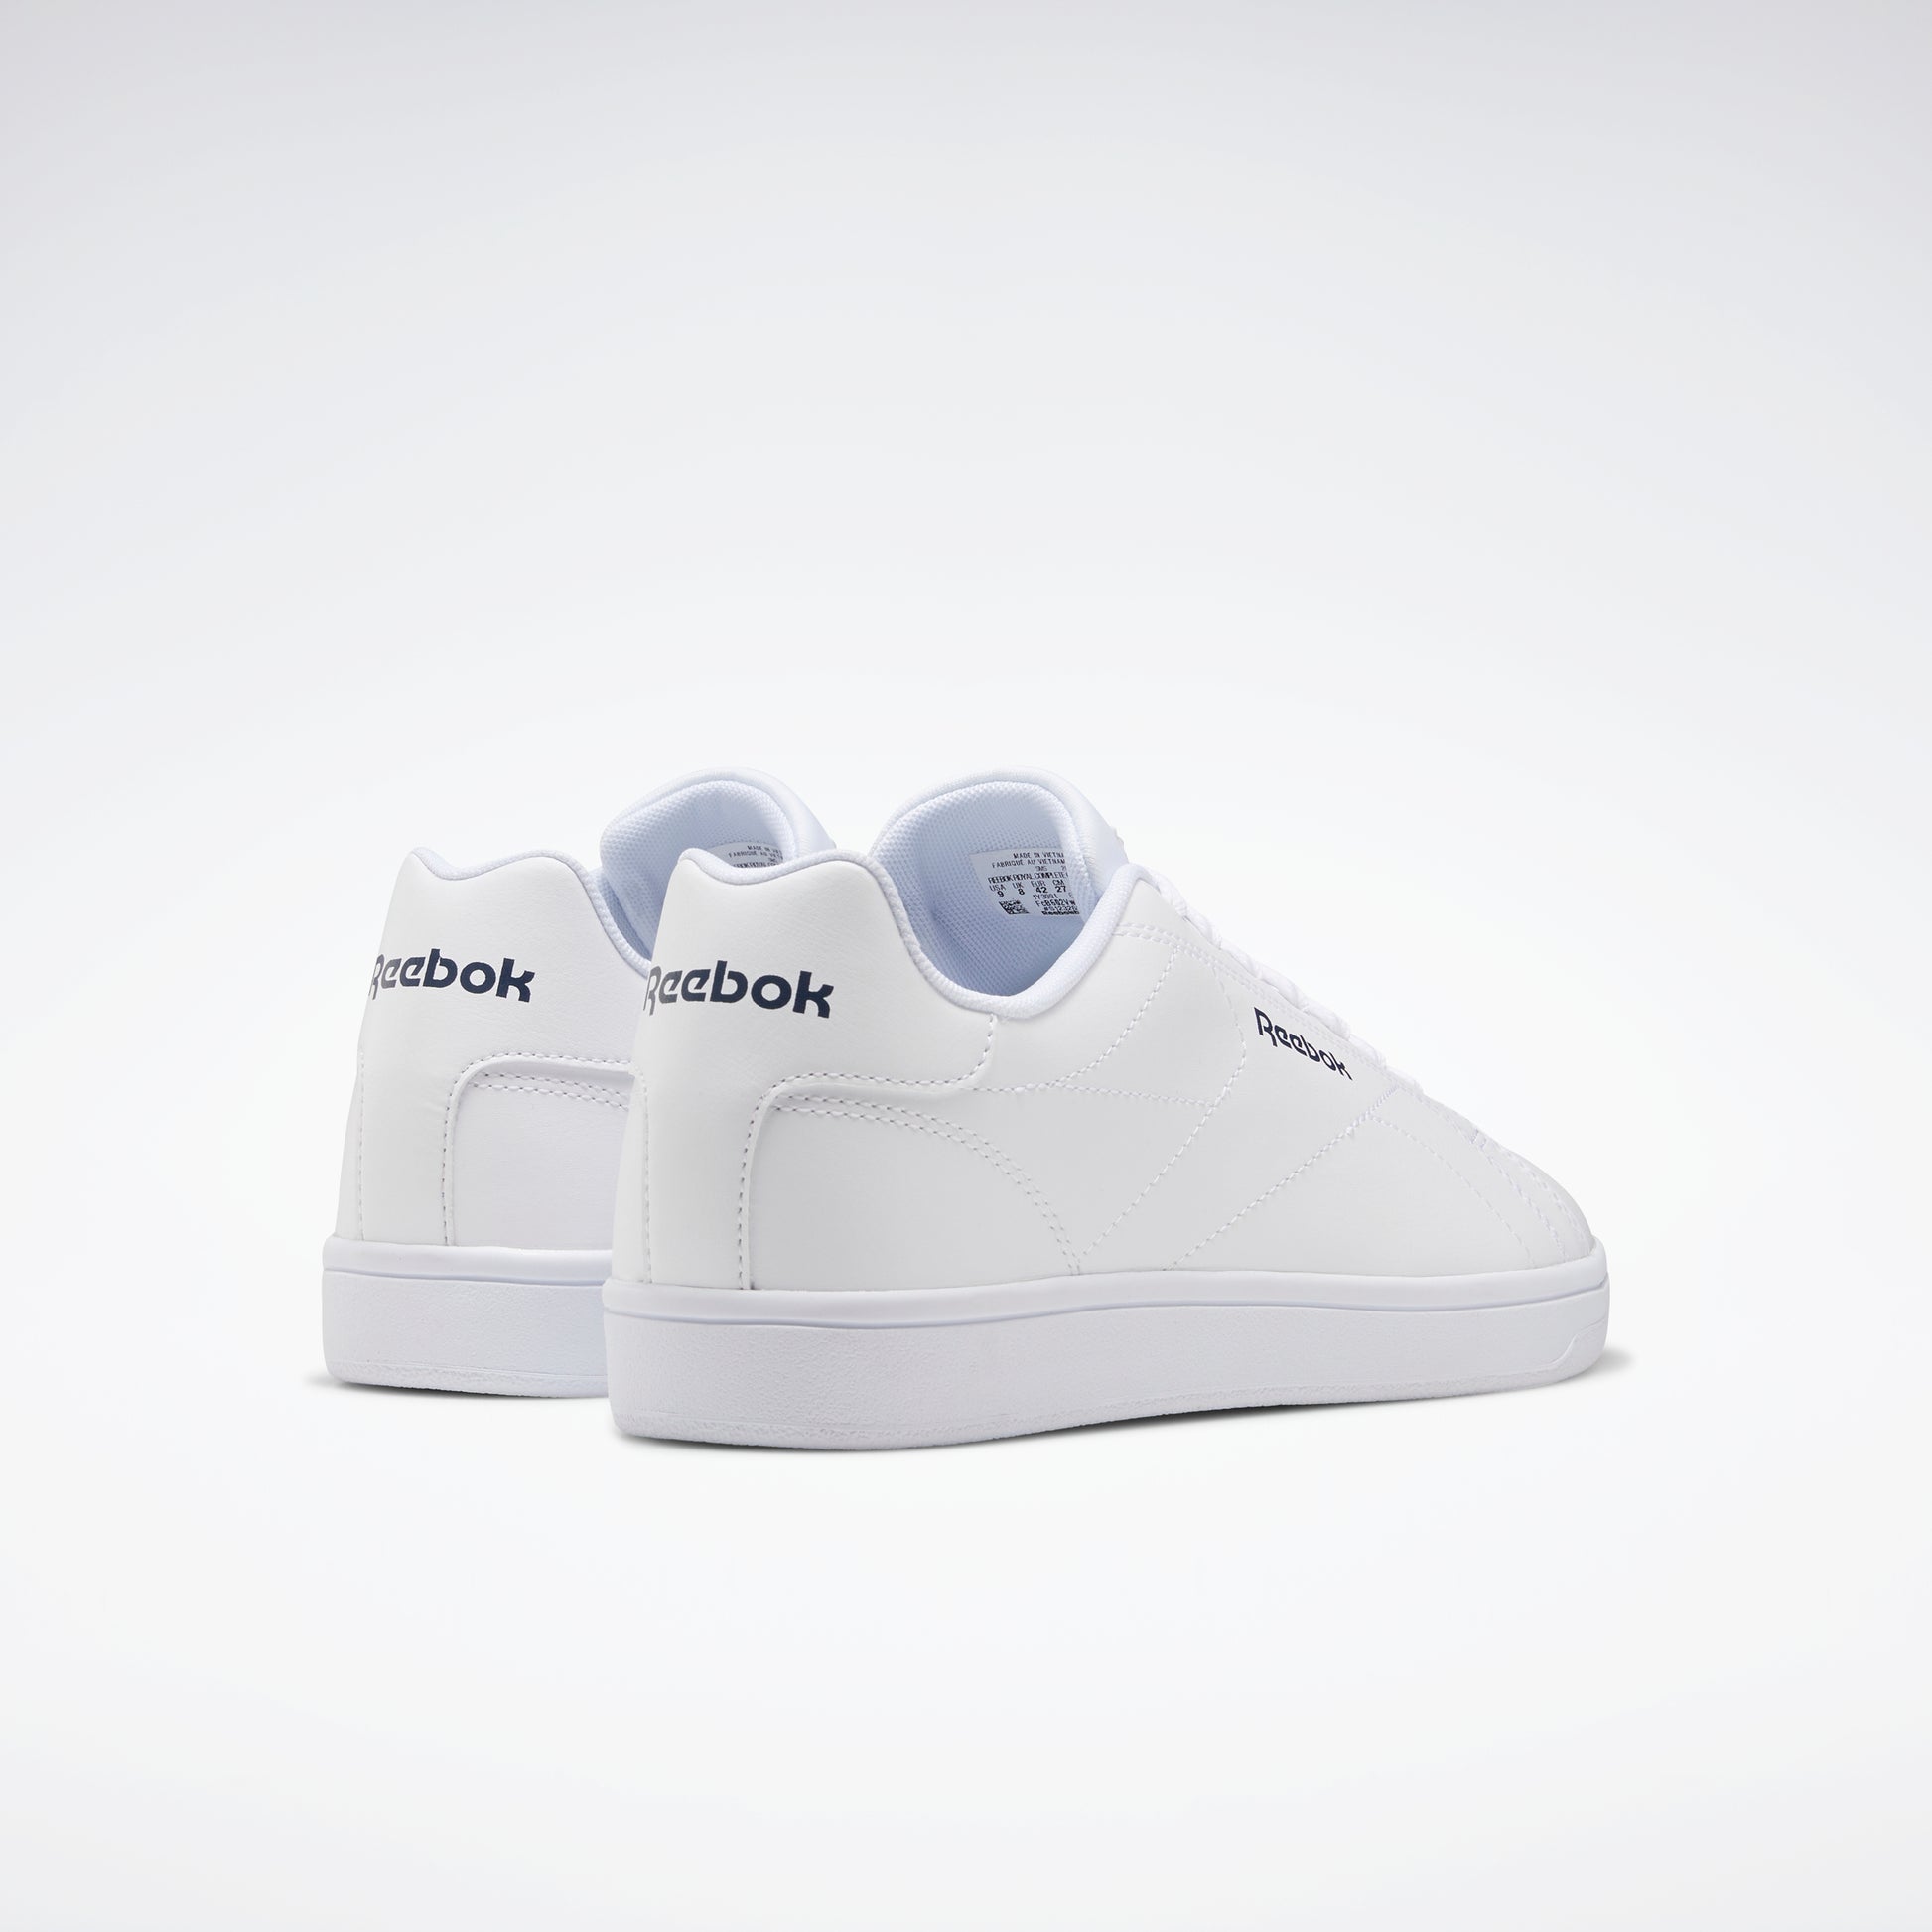 Reebok Royal Complete Clean 2.0 Shoes in White / Collegiate Navy